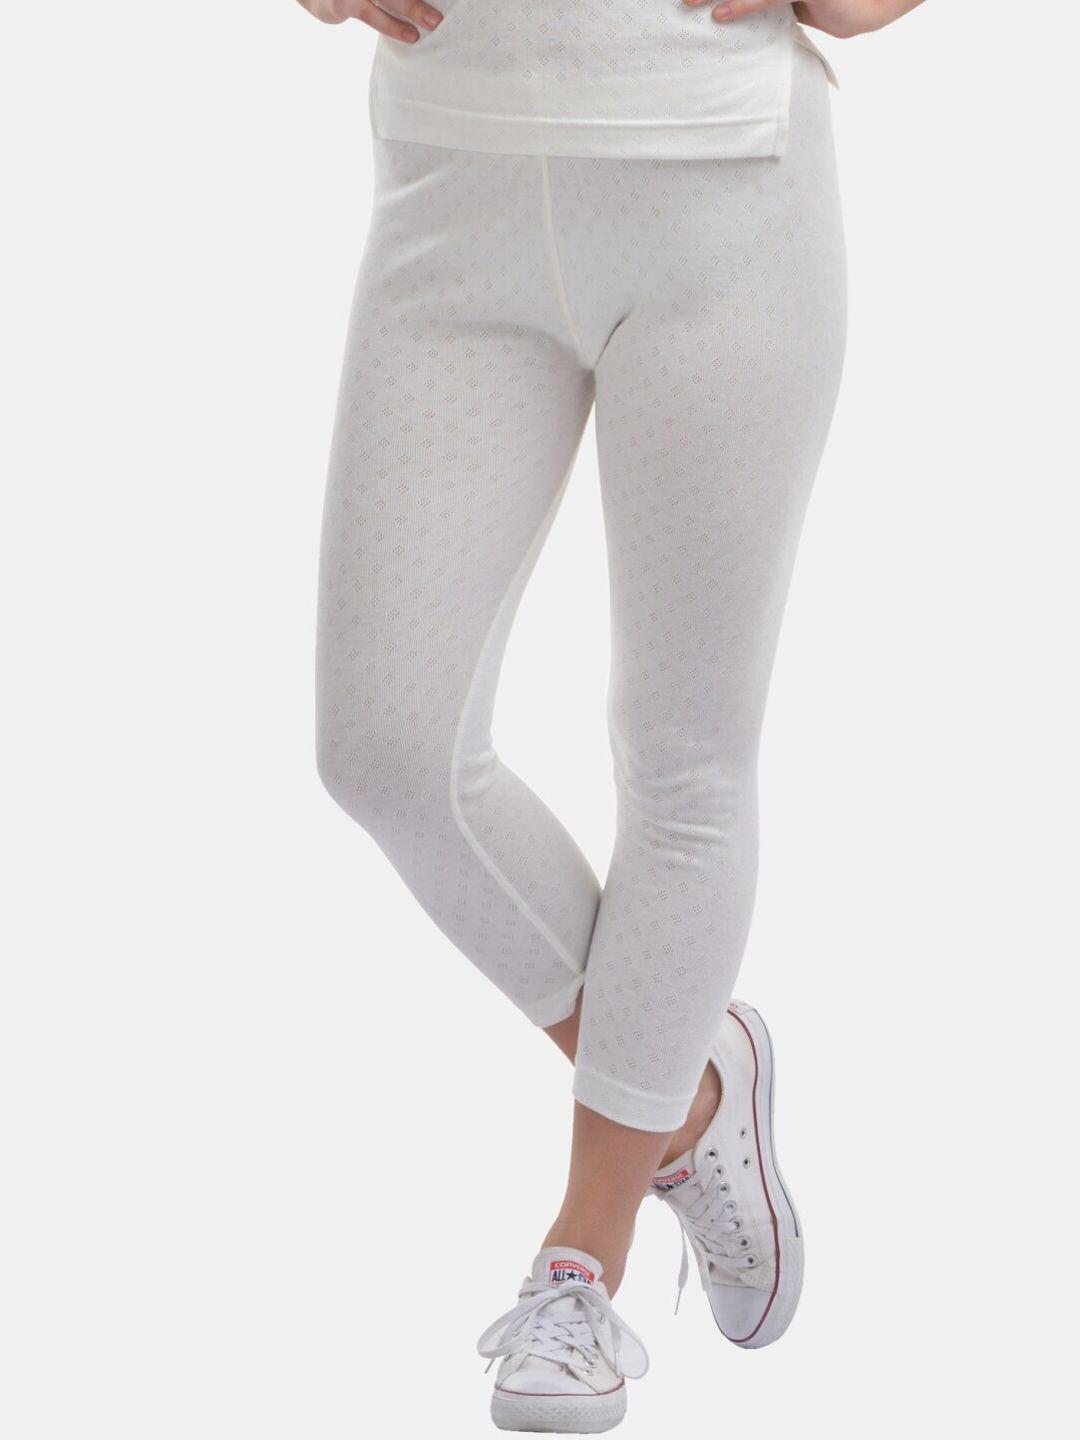 lovable sport women three-fourth length thermal tights